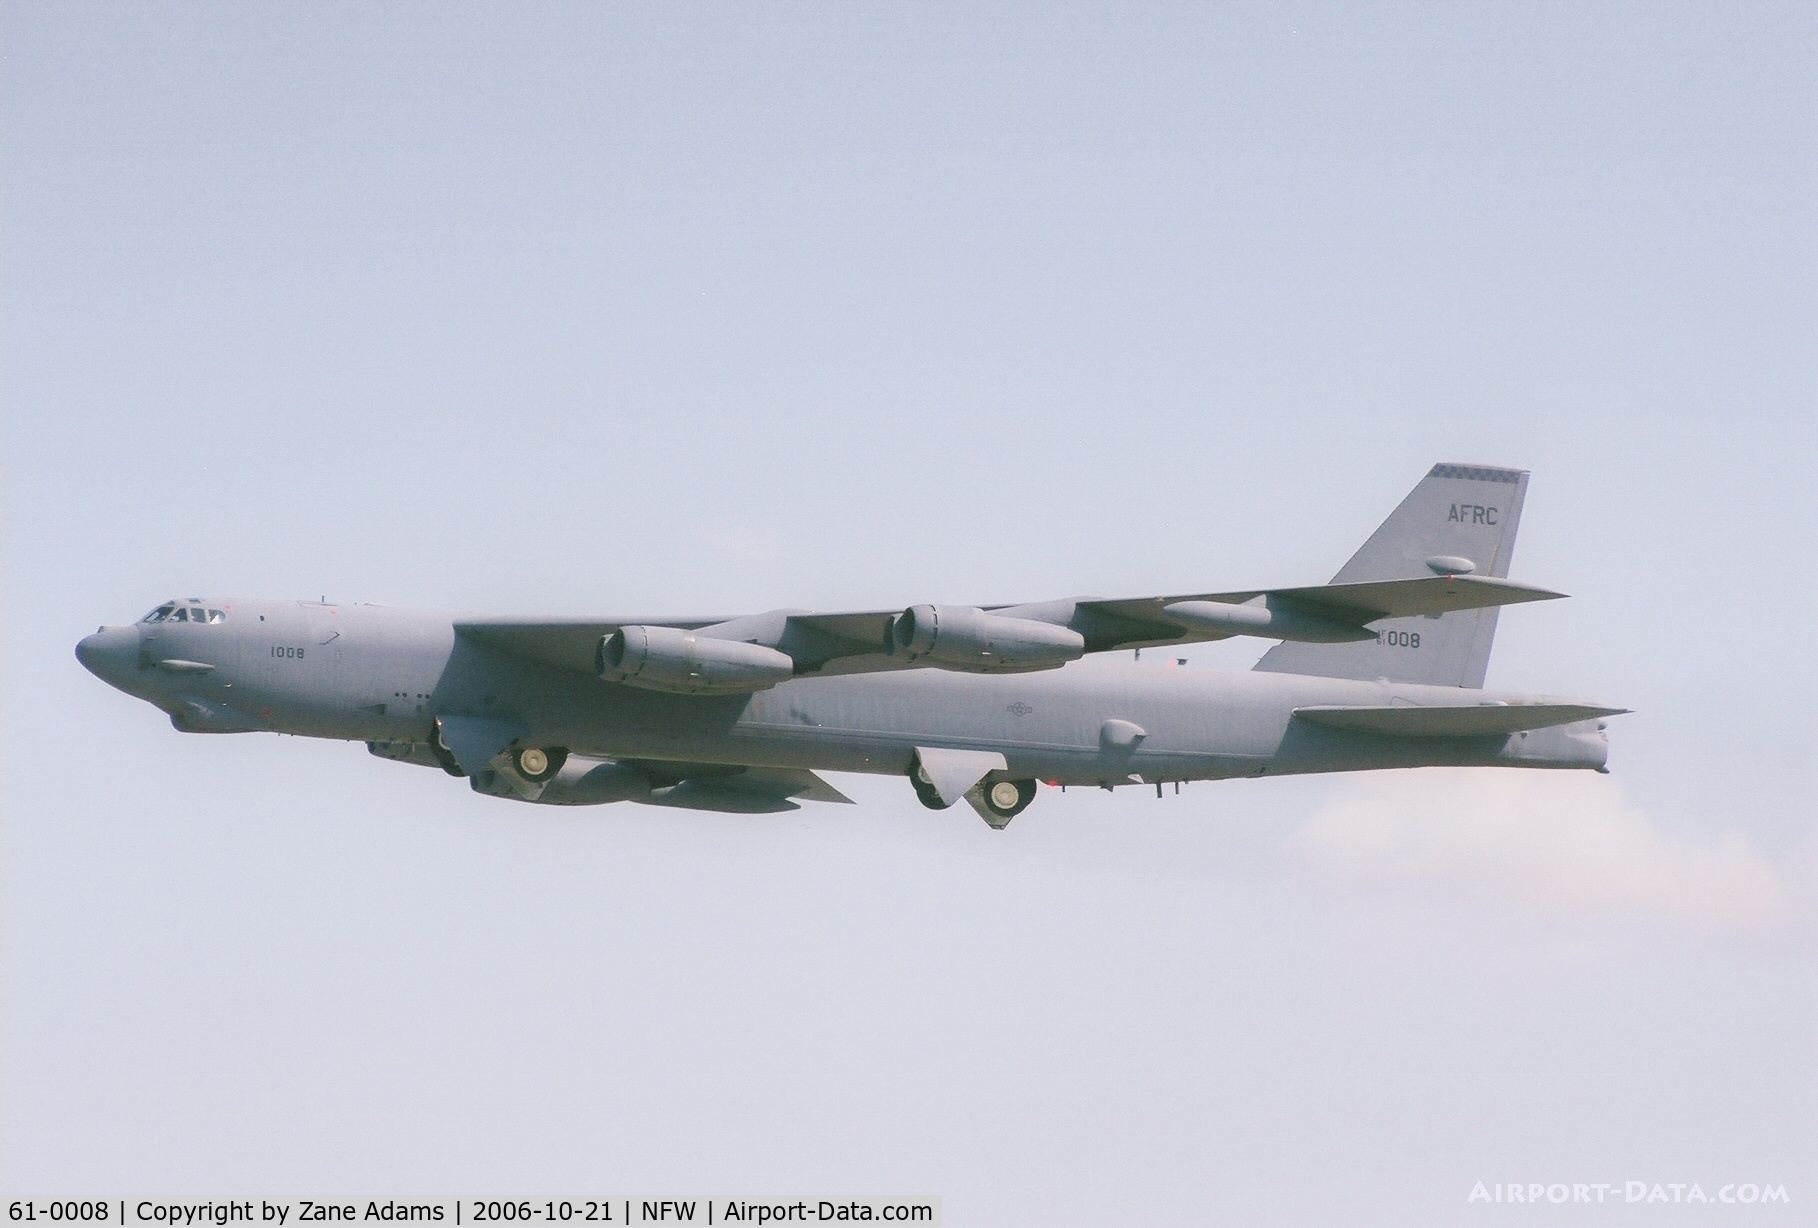 61-0008, 1961 Boeing B-52H Stratofortress C/N 464435, Shooting aproaches at NASJRB Ft. Worth - Carswell